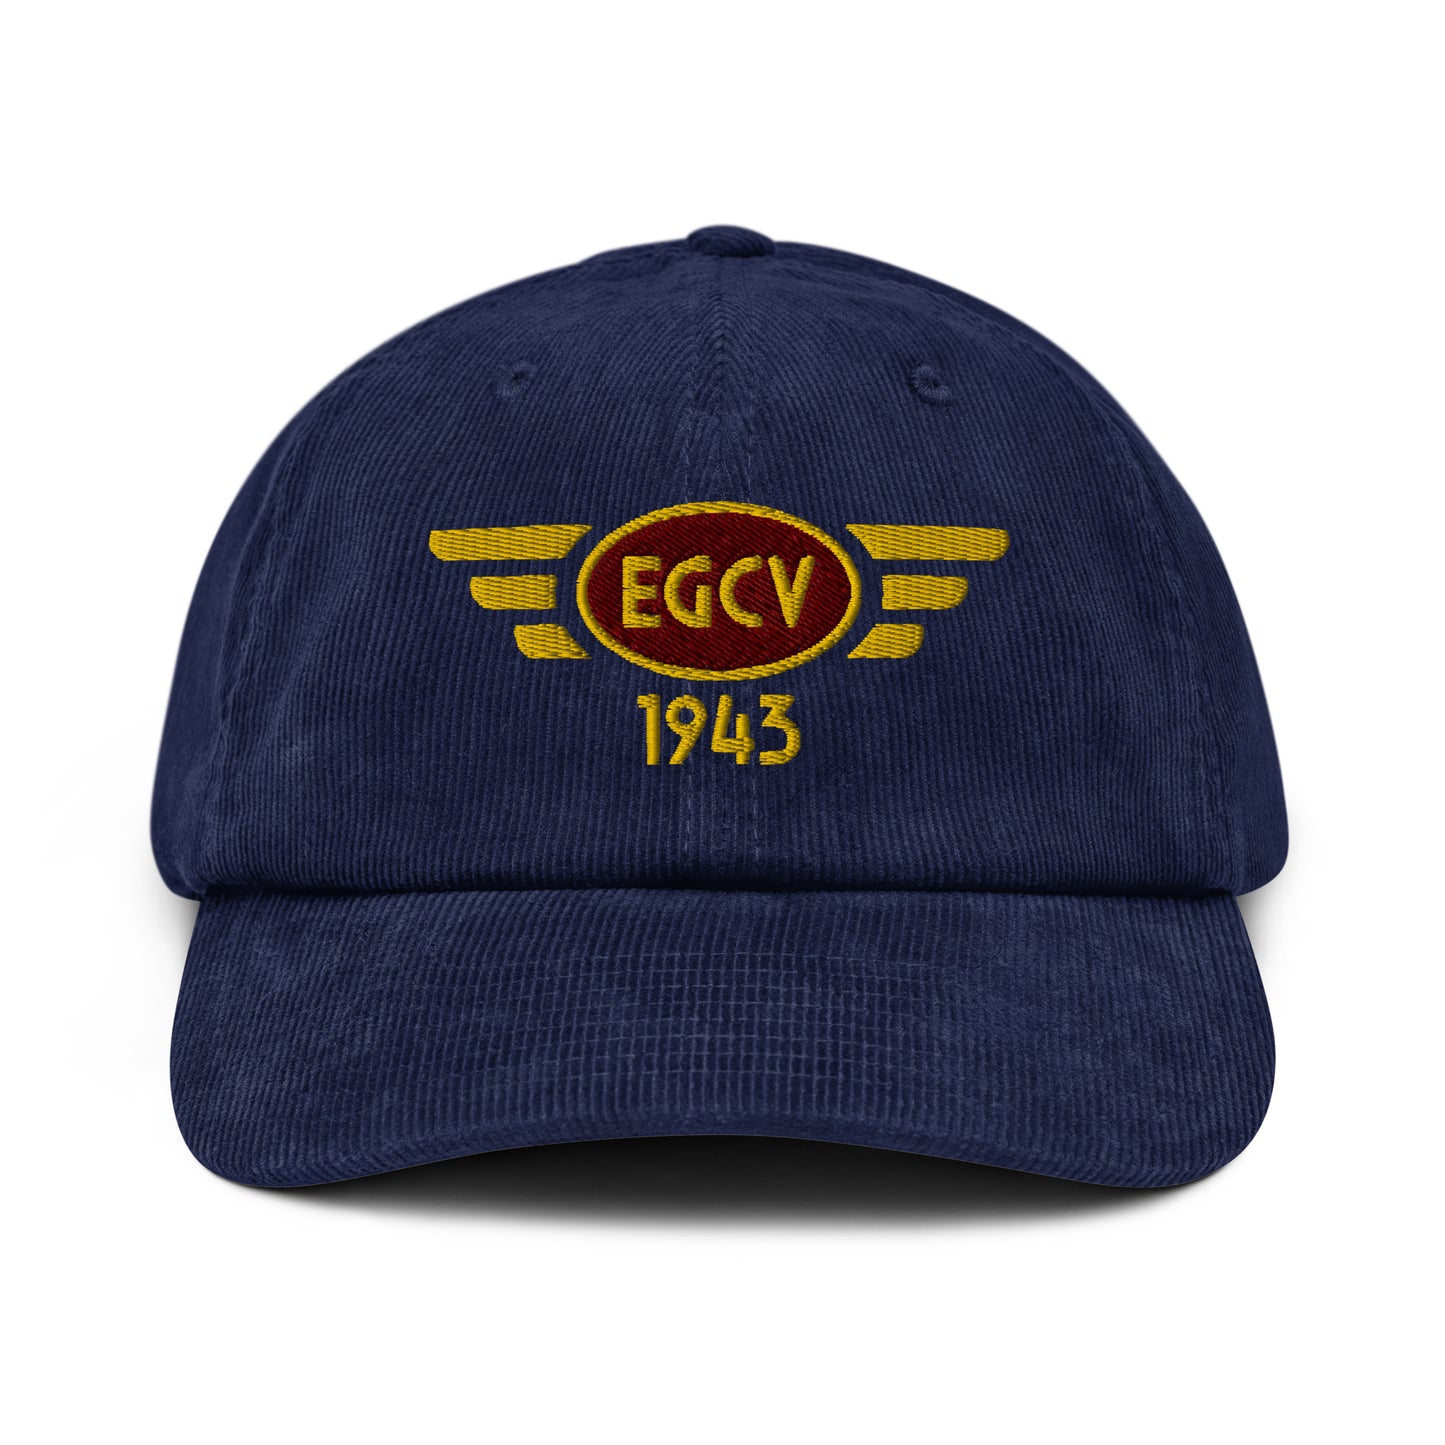 Sleap Airfield corduroy cap with embroidered ICAO code.